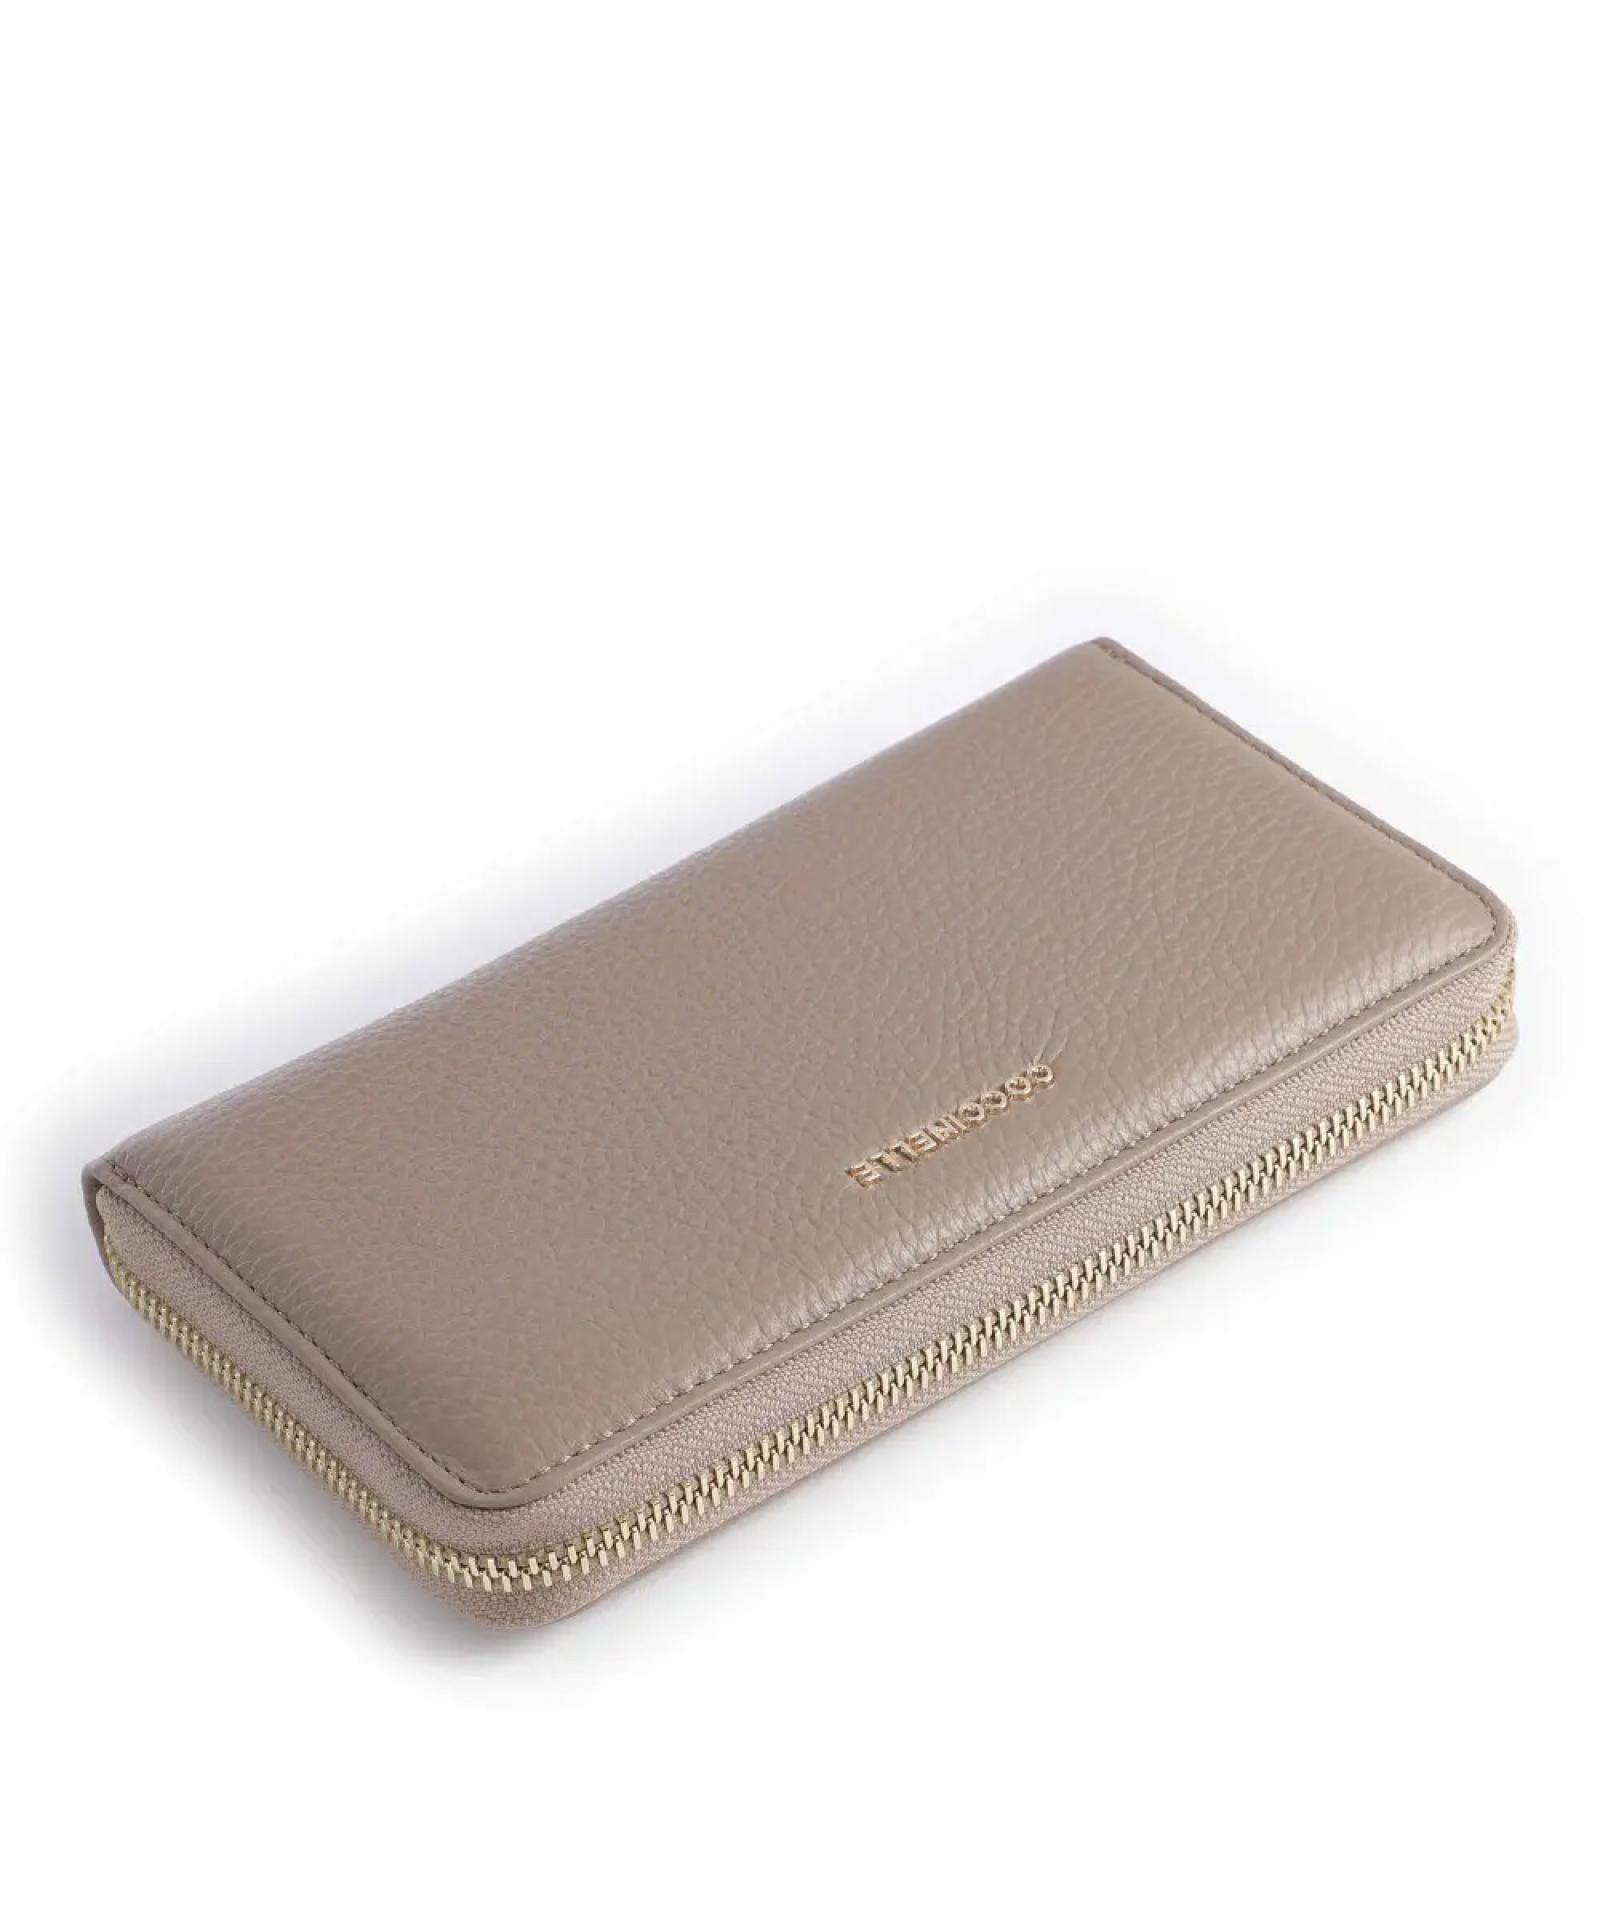 Coccinelle WALLET GRAINED LEATHER / WARM TAUPE